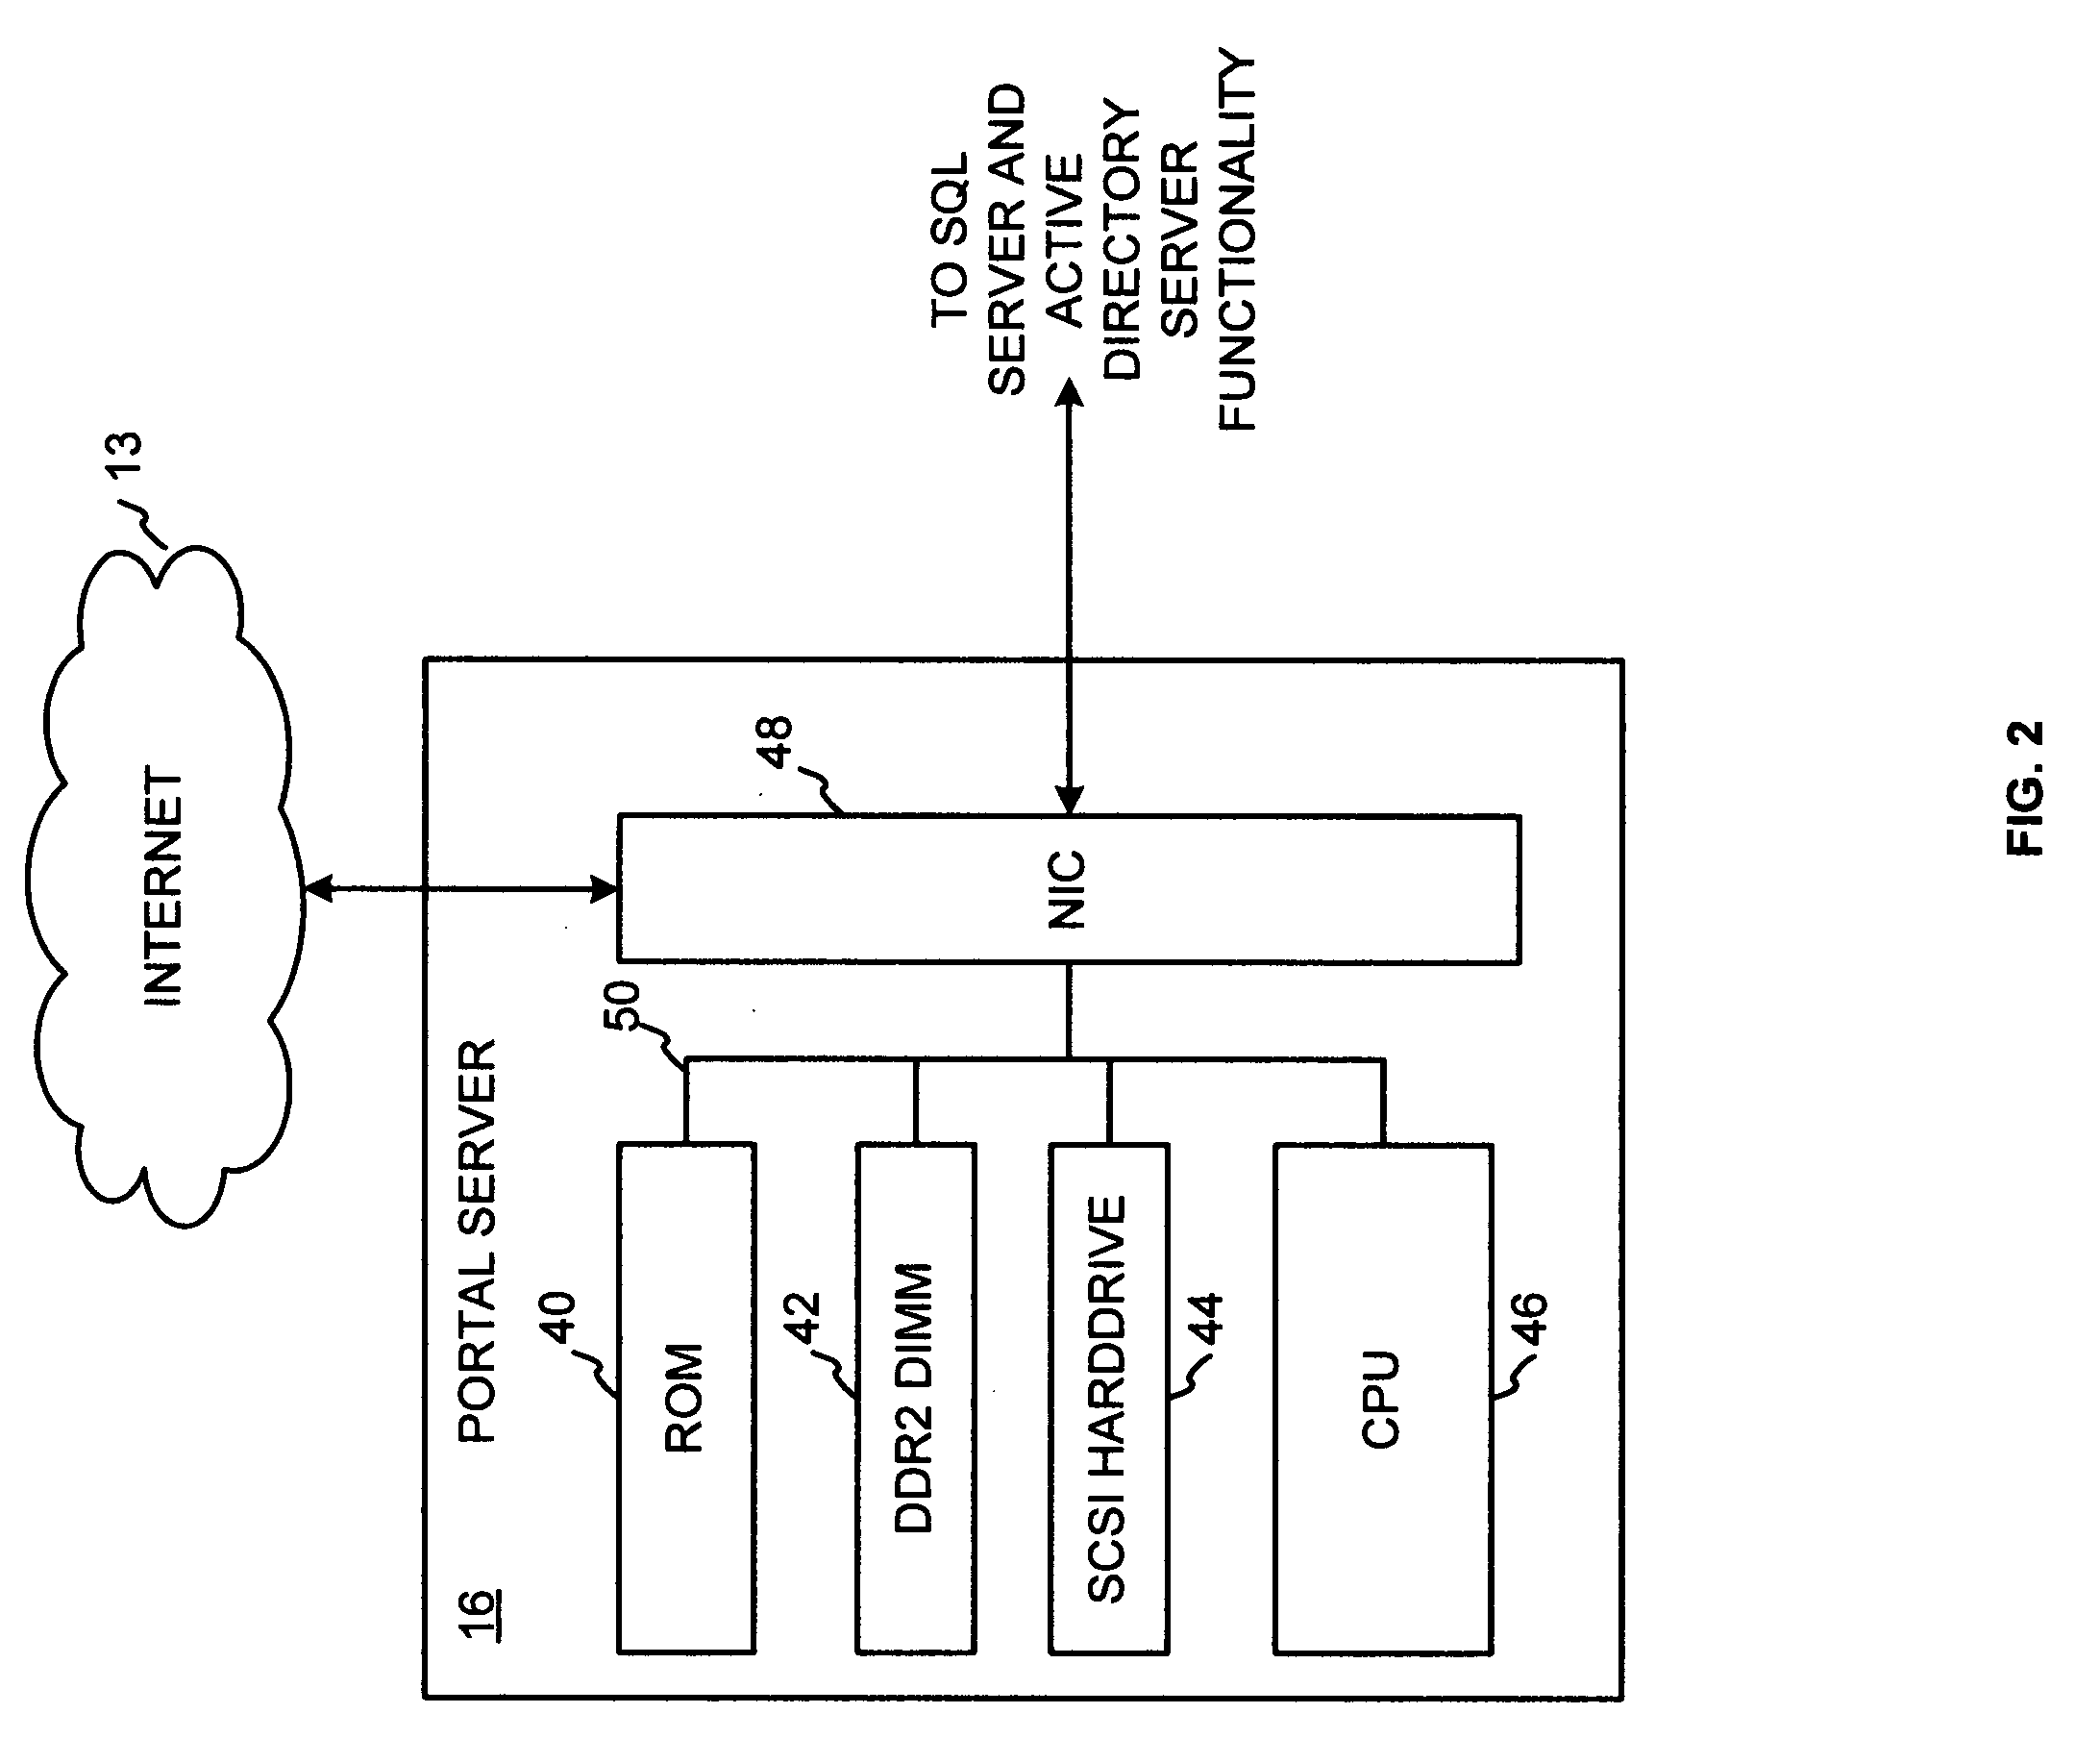 System and method for providing a web portal for managing litigation activities